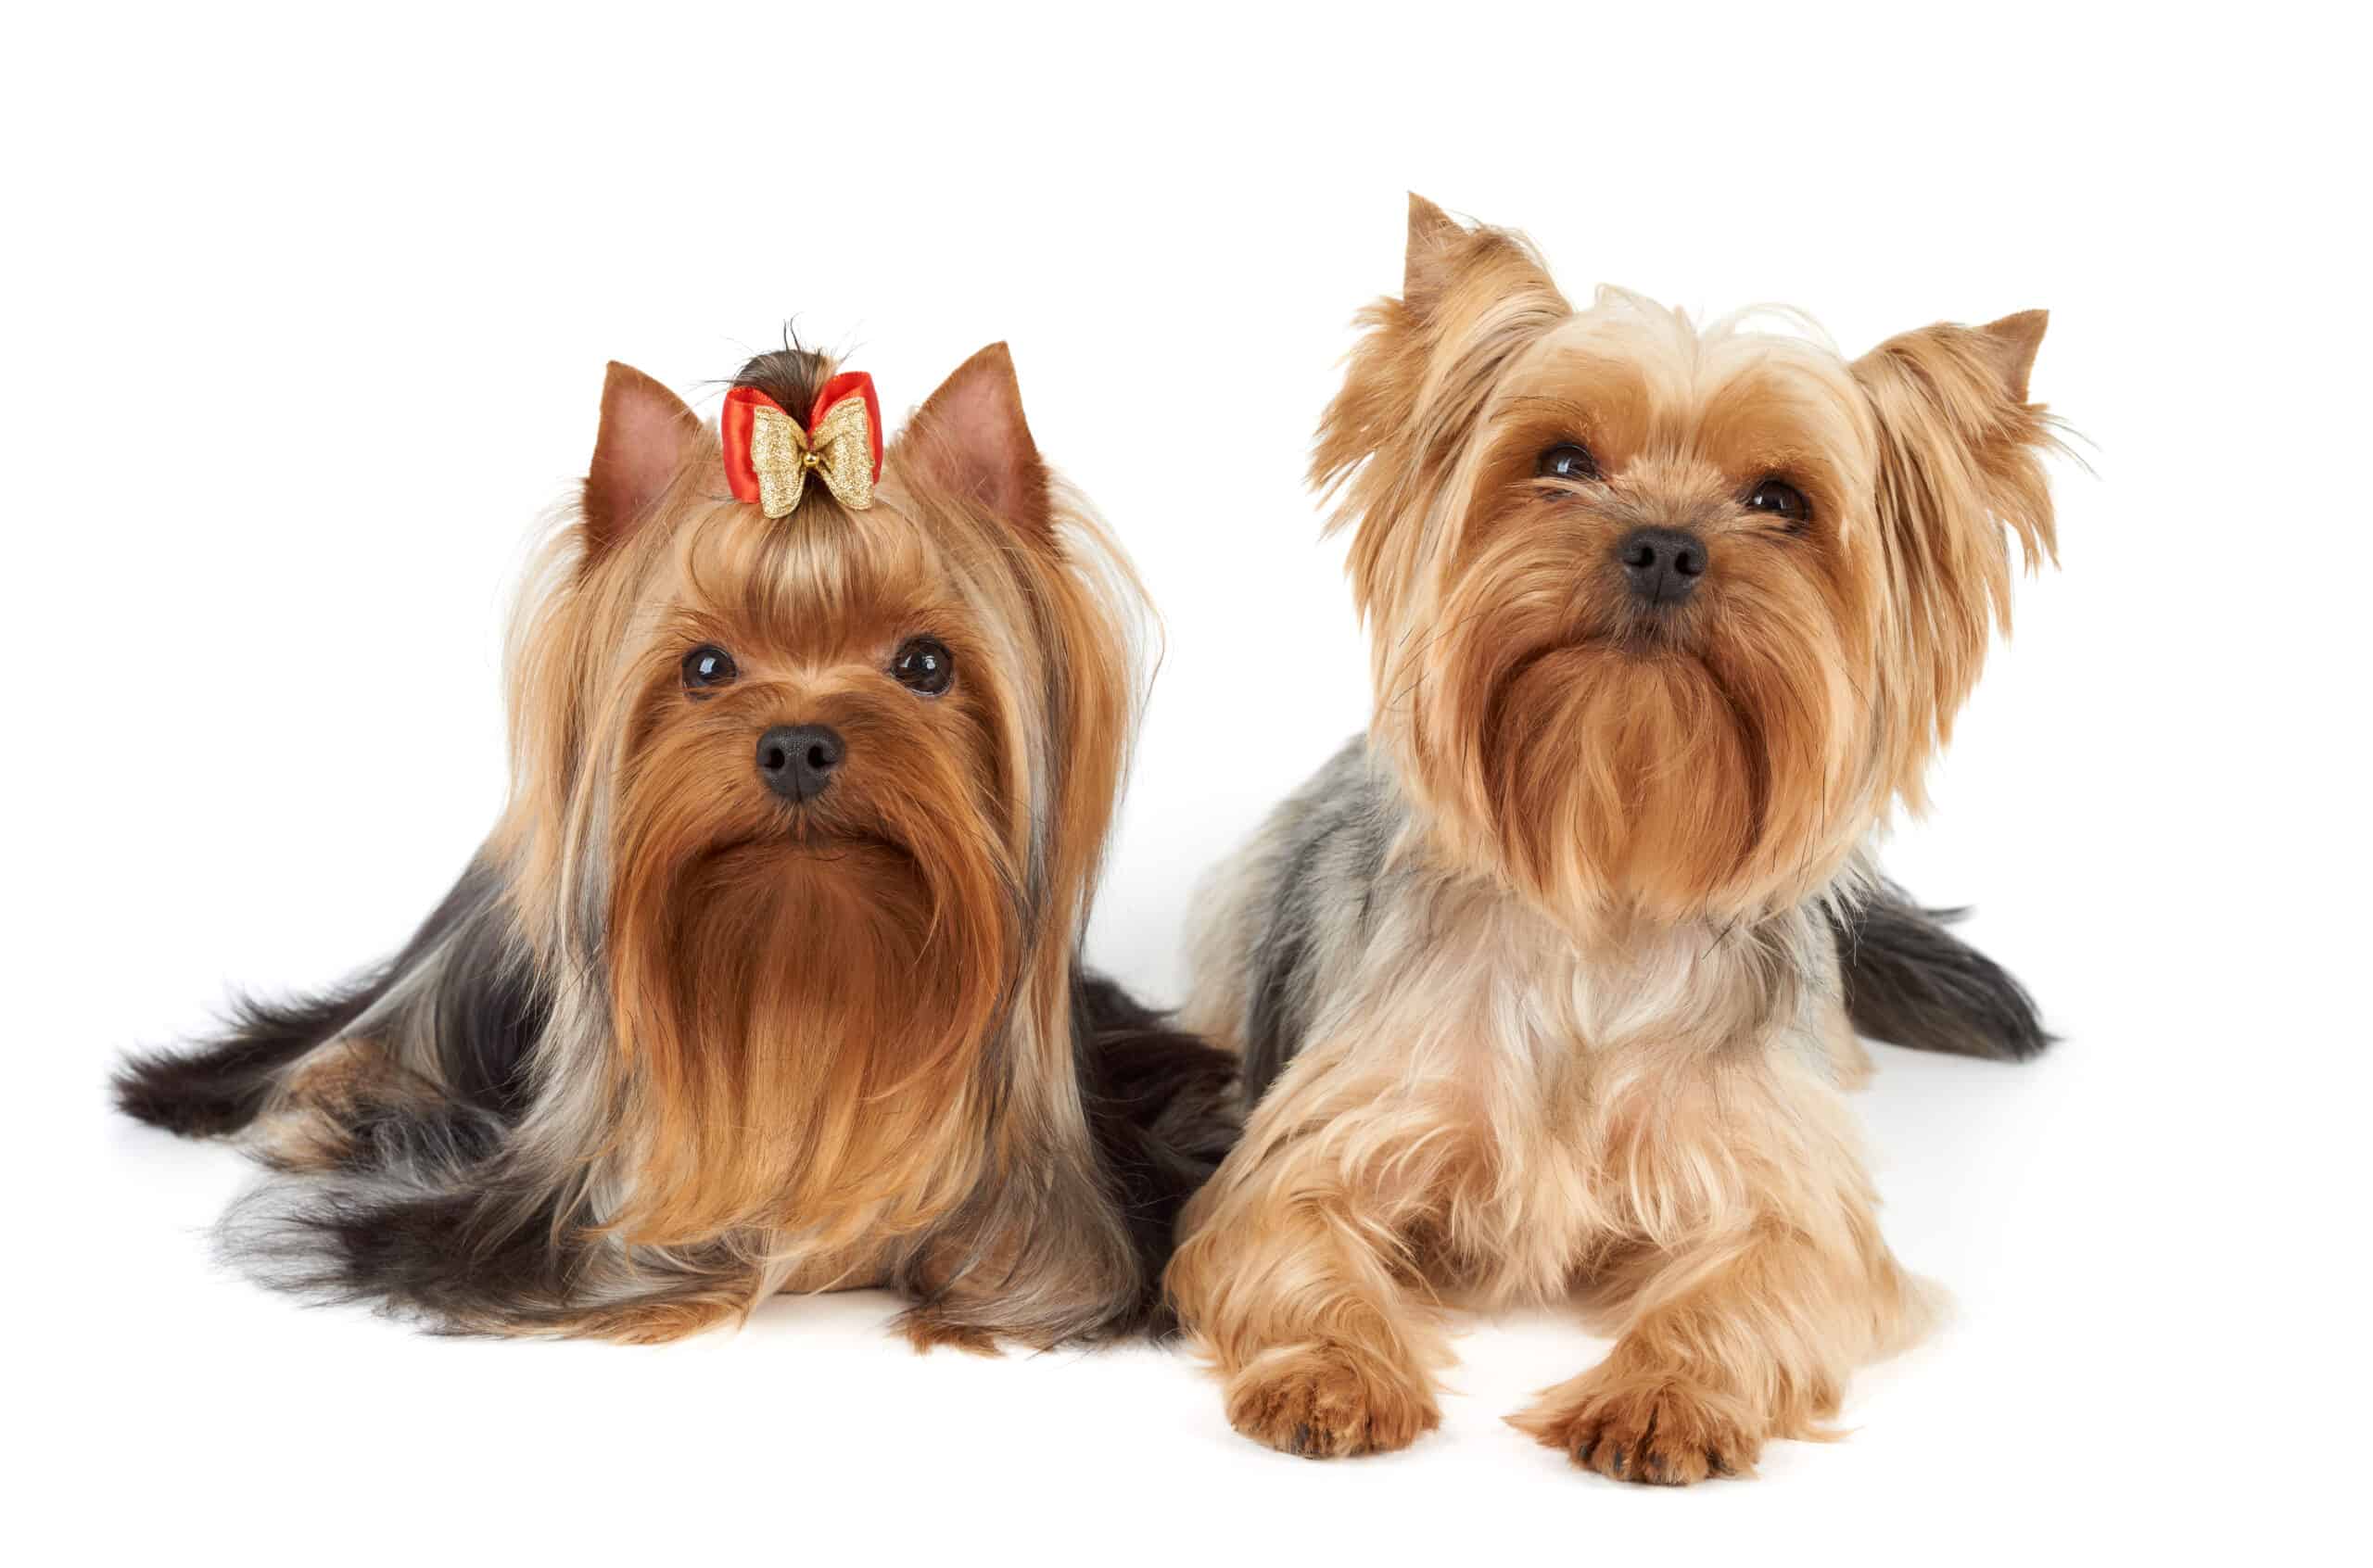 Care and Feeding of Yorkshire Terriers